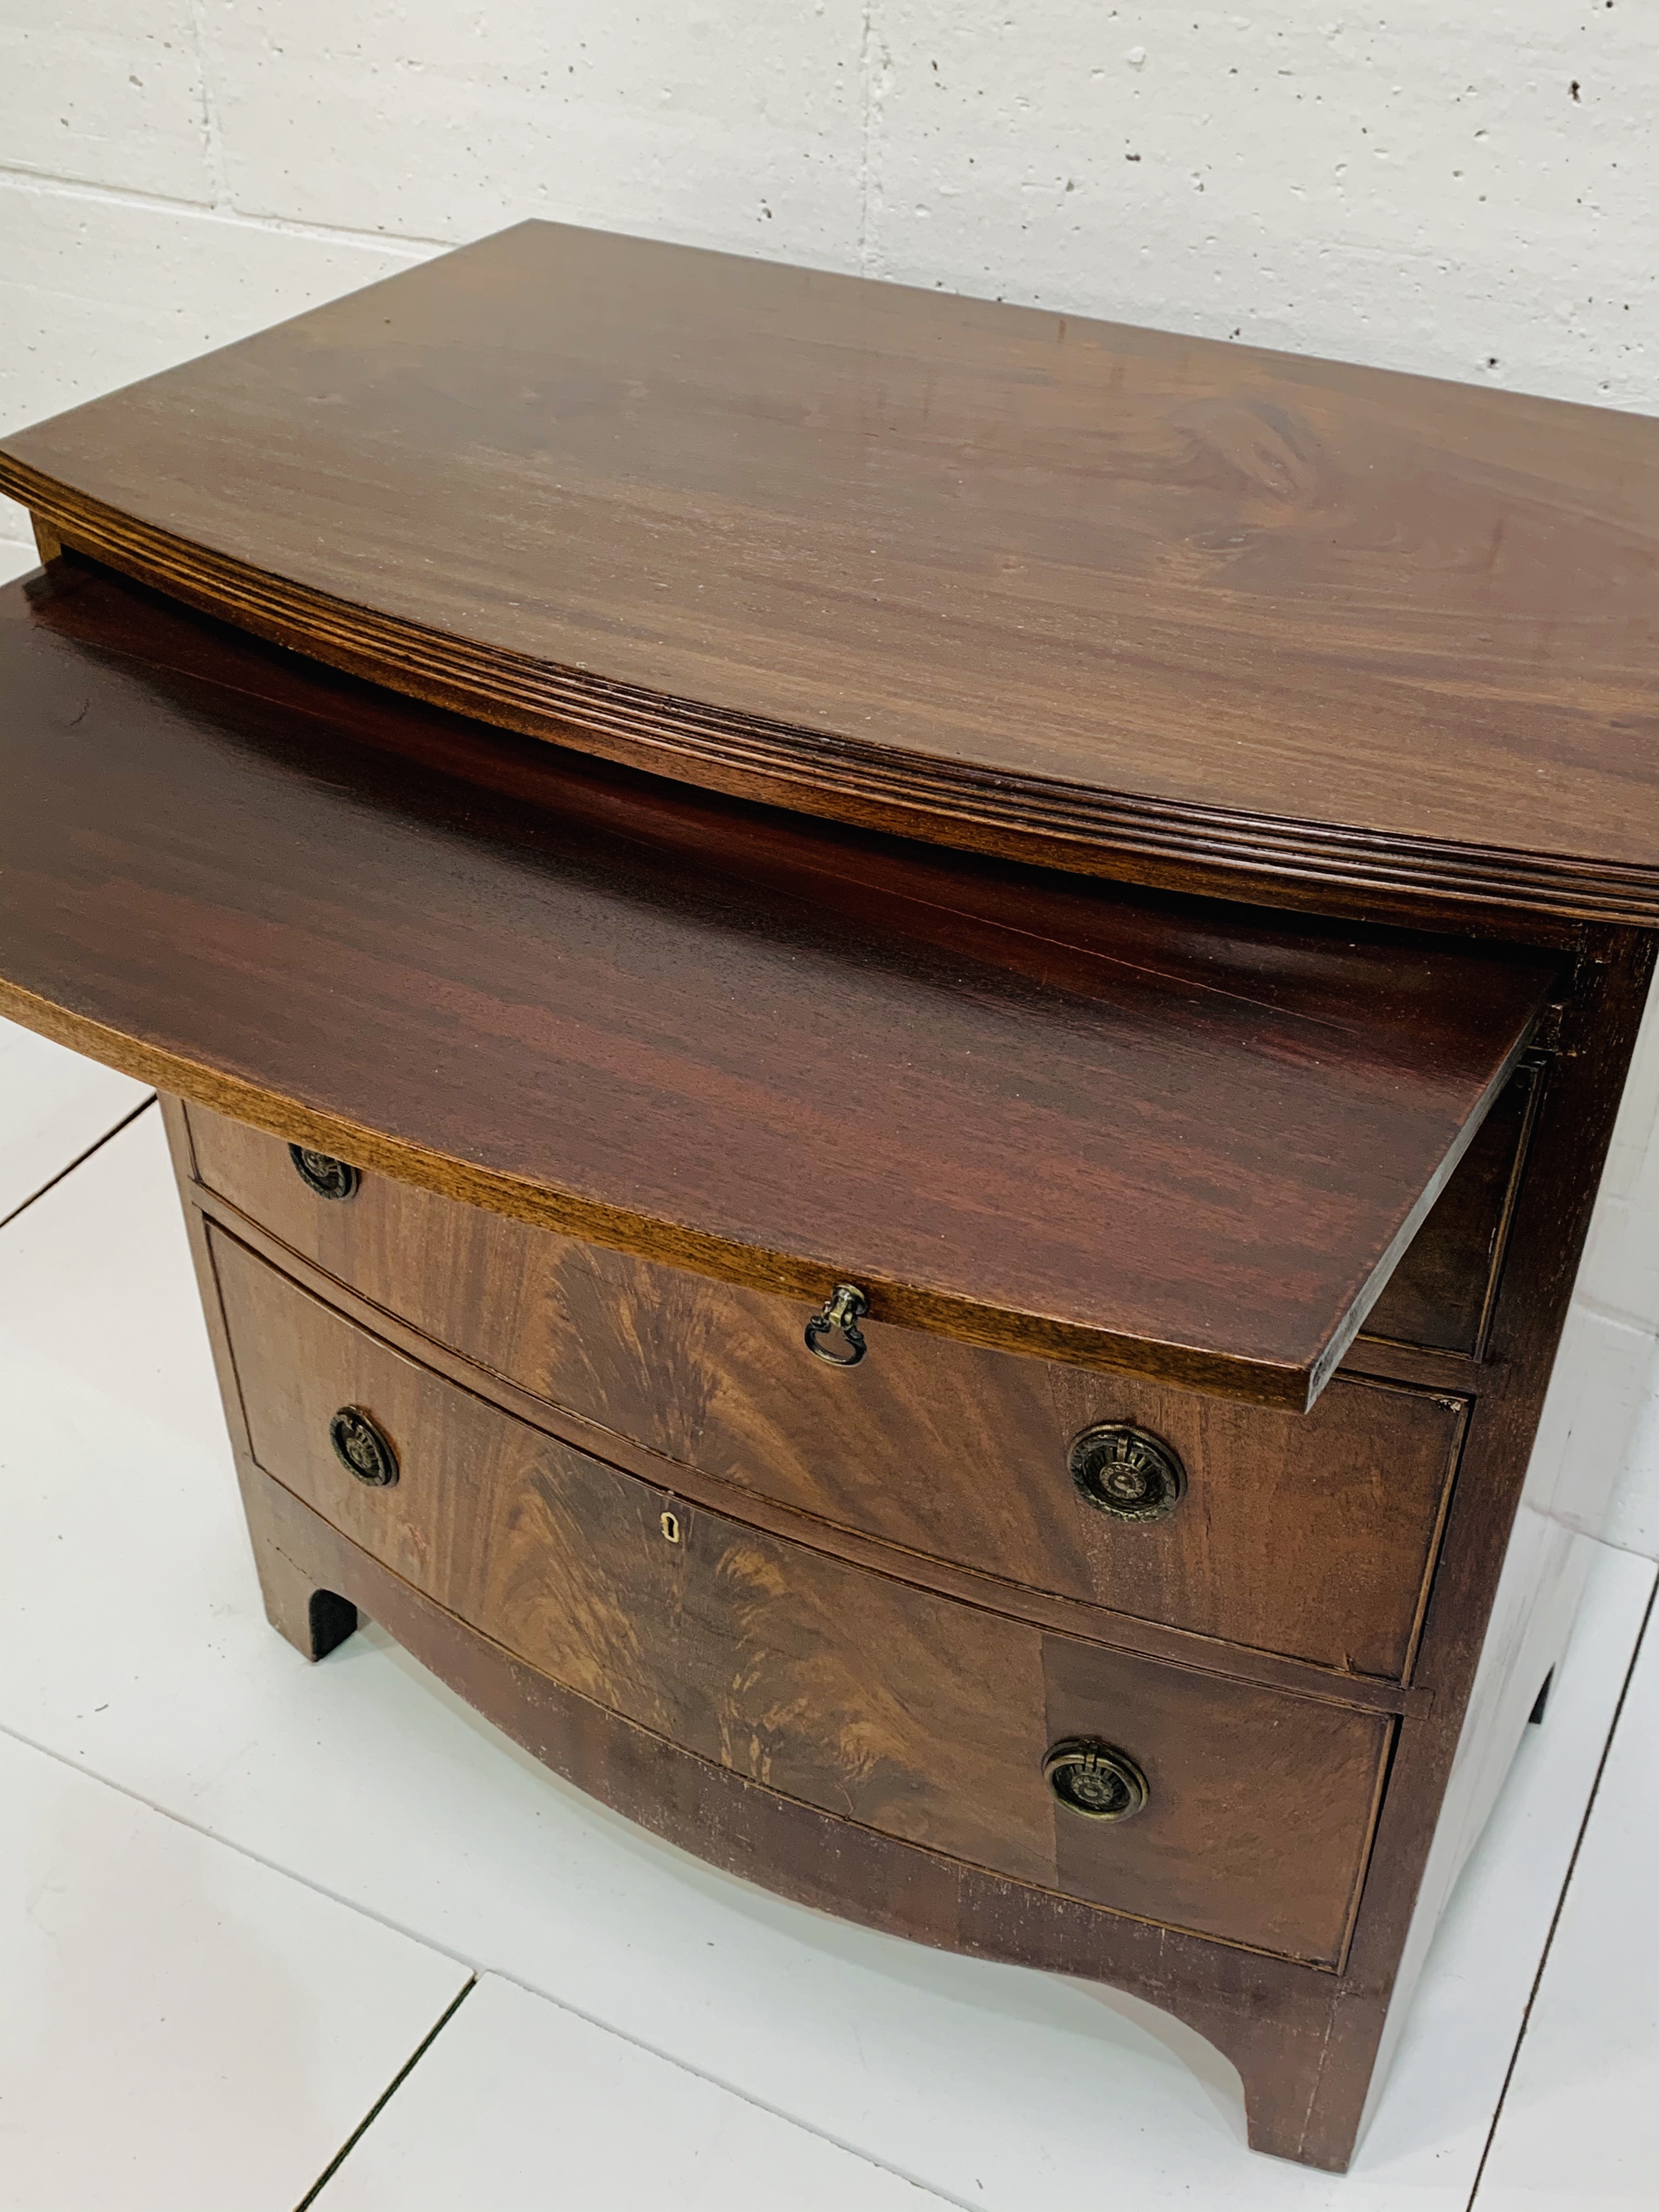 Mahogany bow-fronted chest with three drawers and pull out slide. - Image 4 of 4